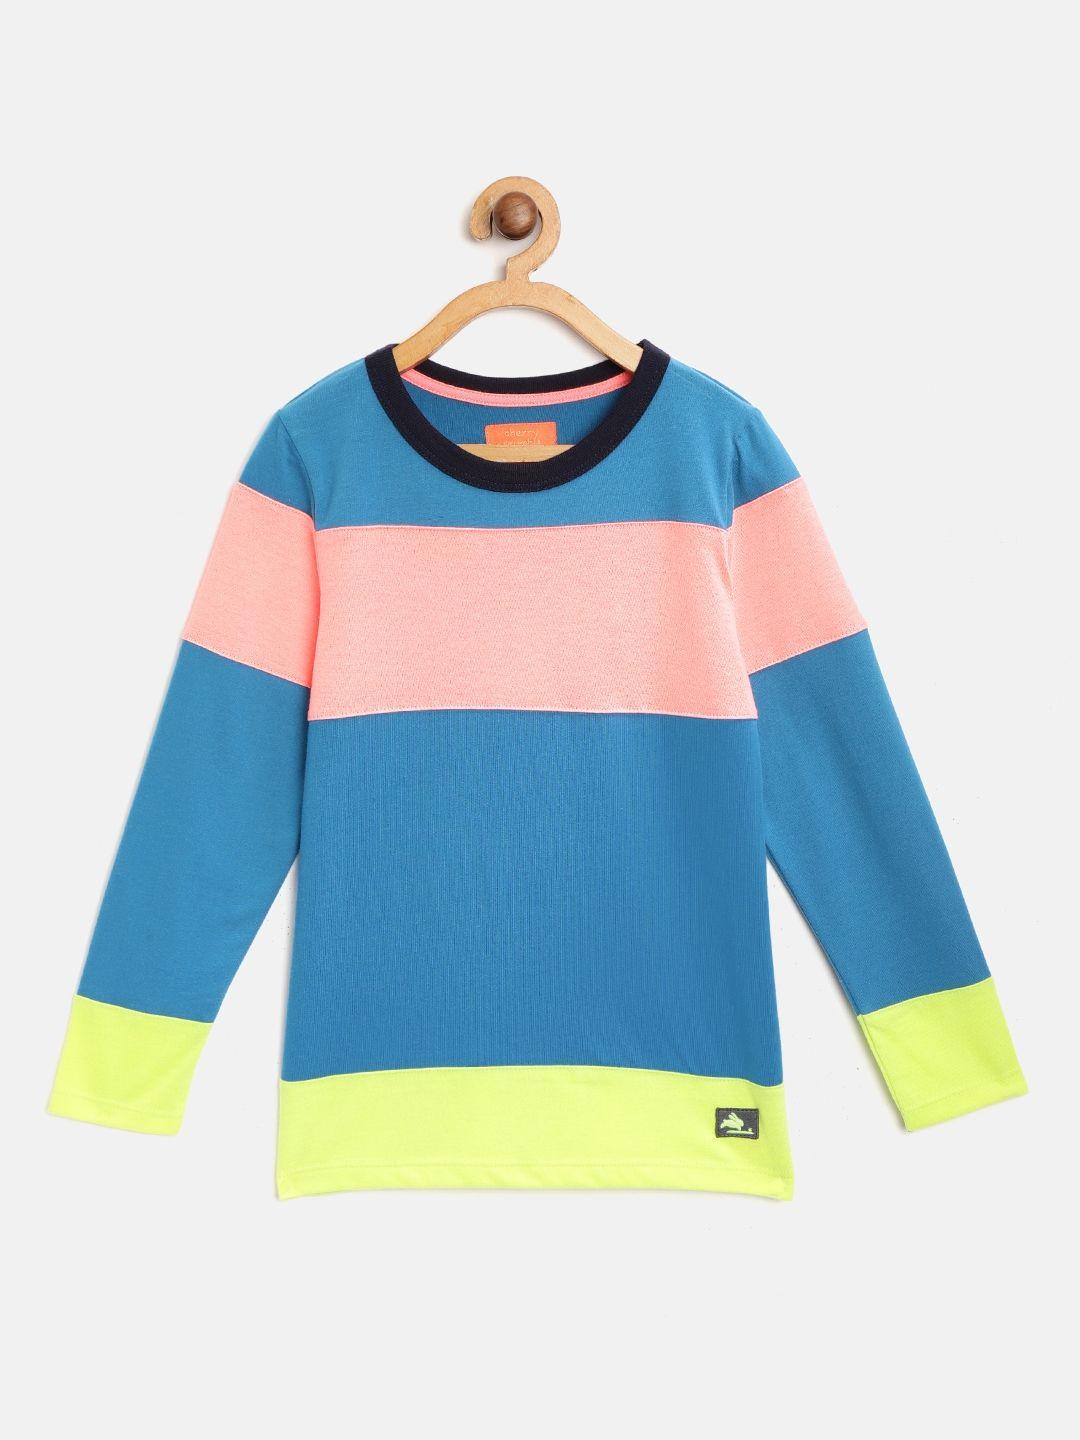 cherry crumble boys teal blue & coral pink colourblocked round neck t-shirt